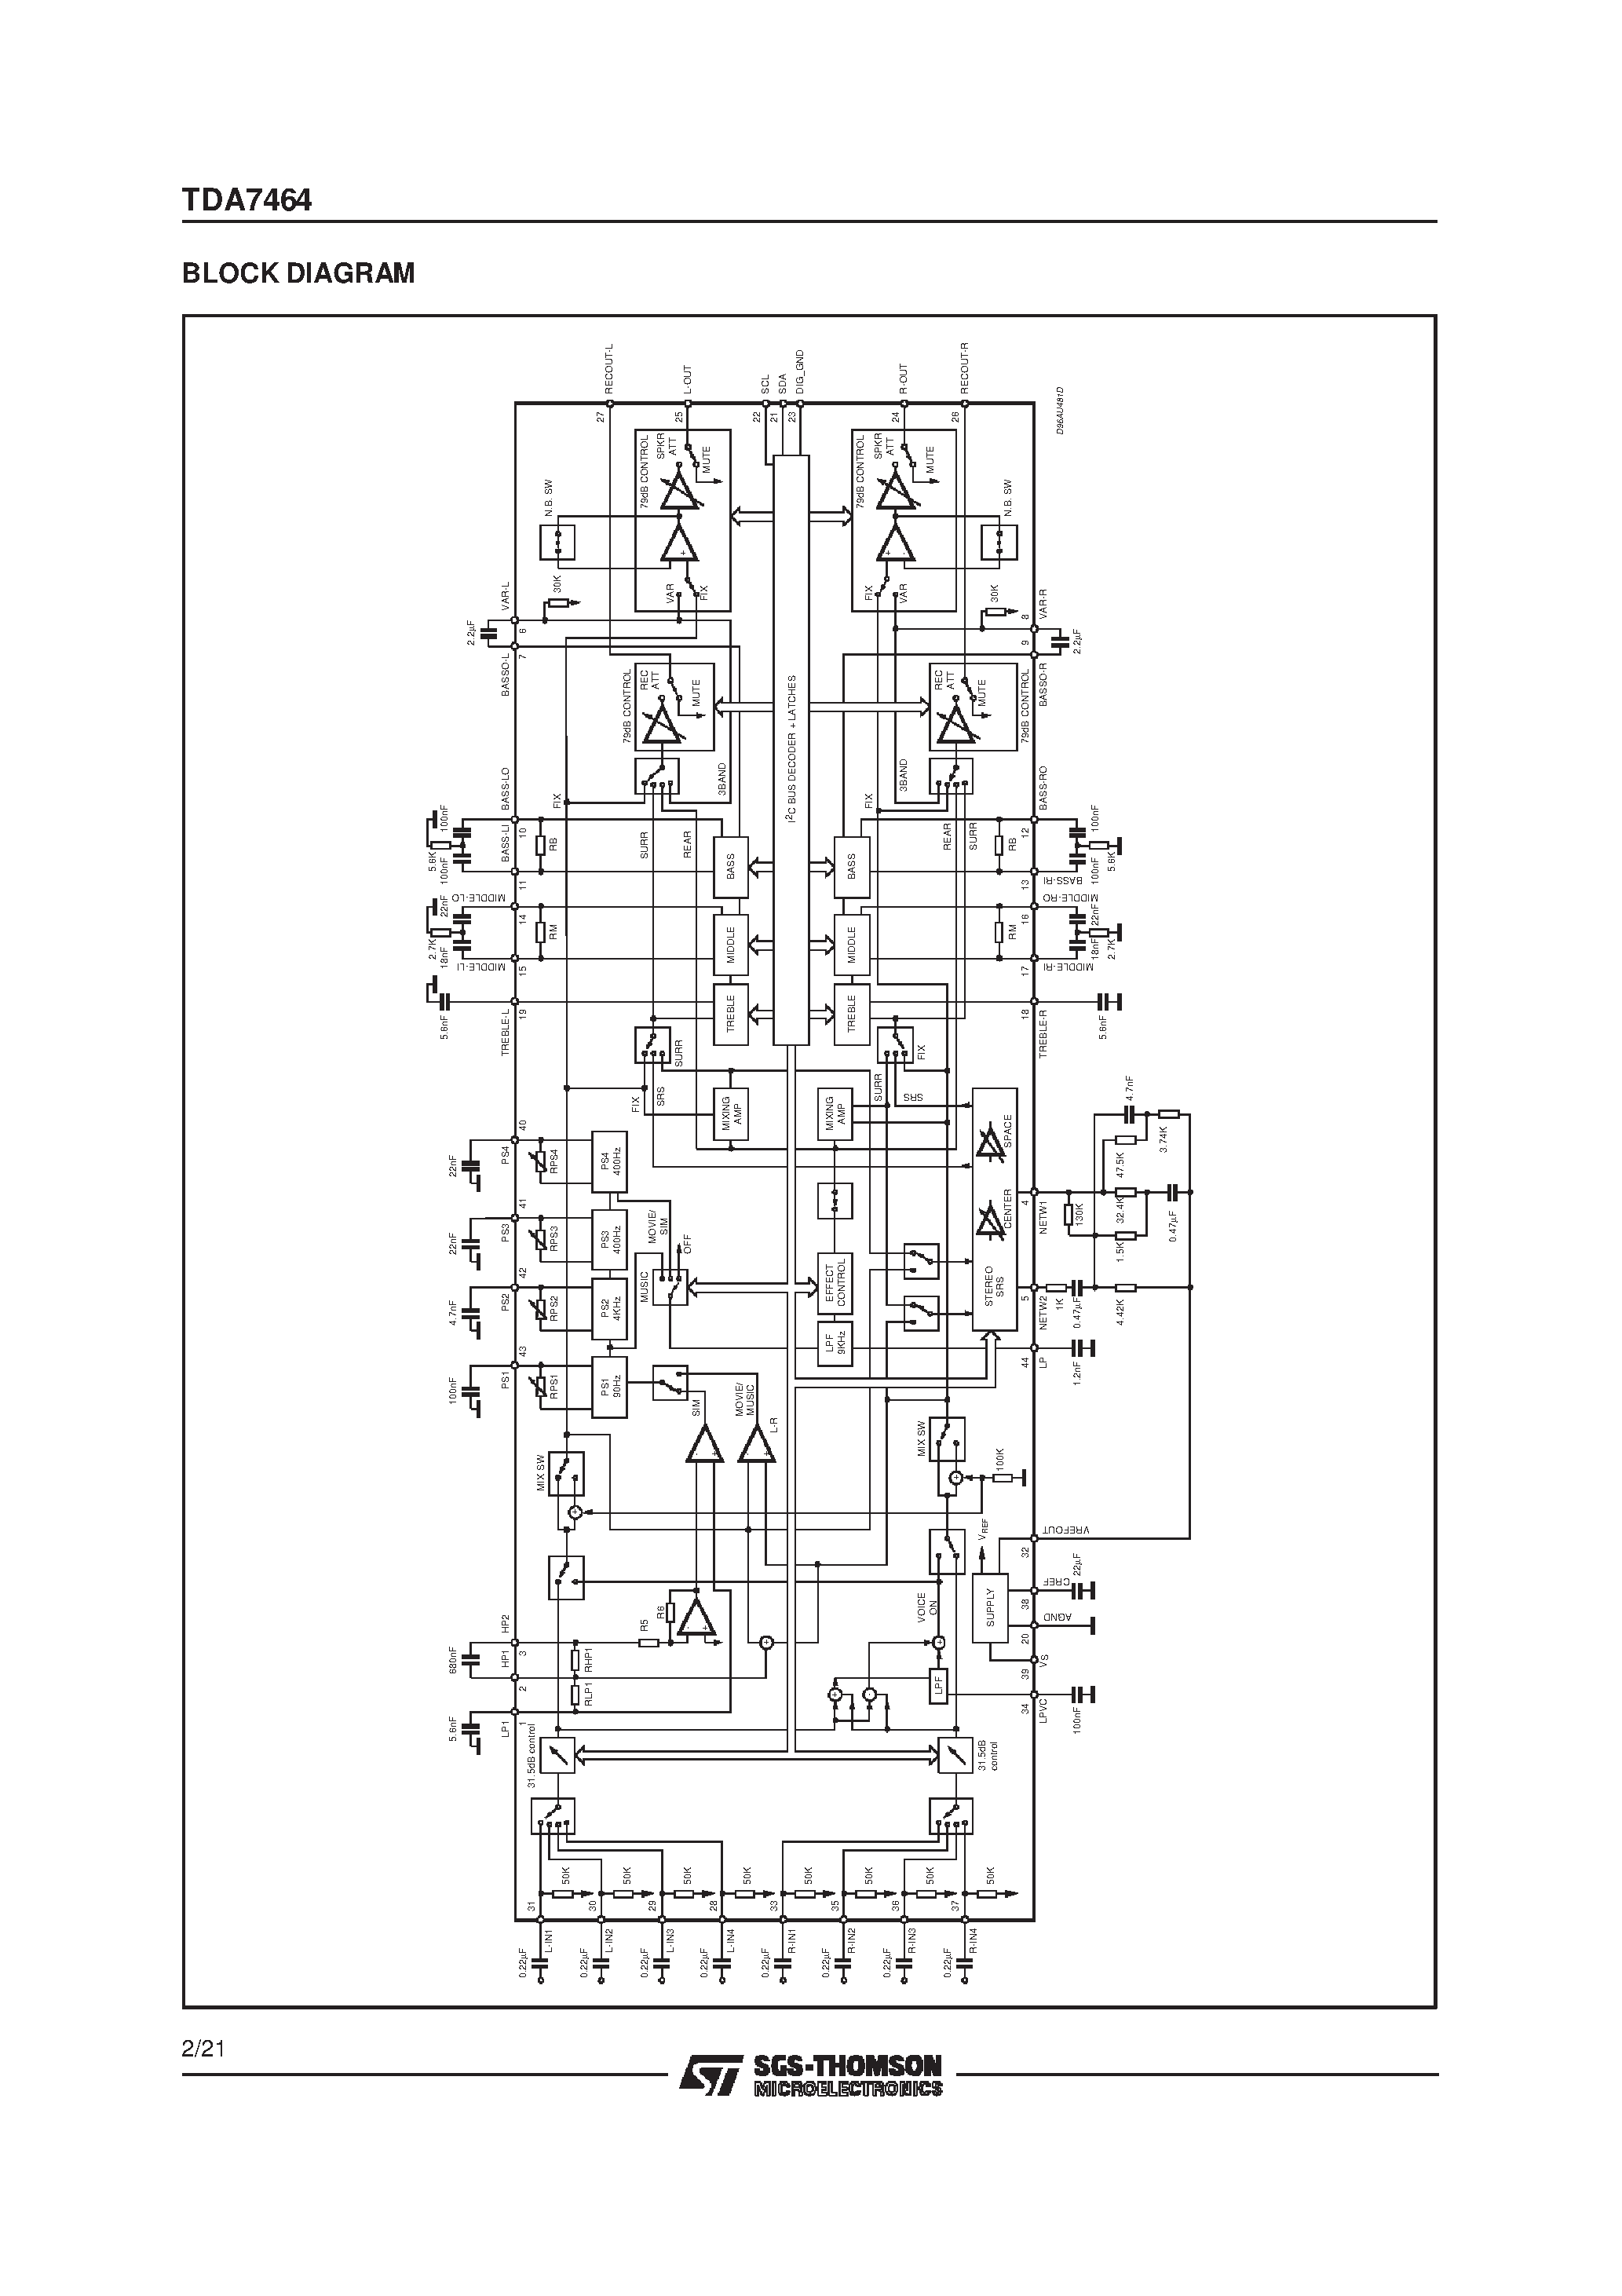 Datasheet 7464 - DIGITALLY CONTROLLED AUDIO PROCESSOR WITH SRS SURROUND SOUND AND VOICE CANCELLER page 2